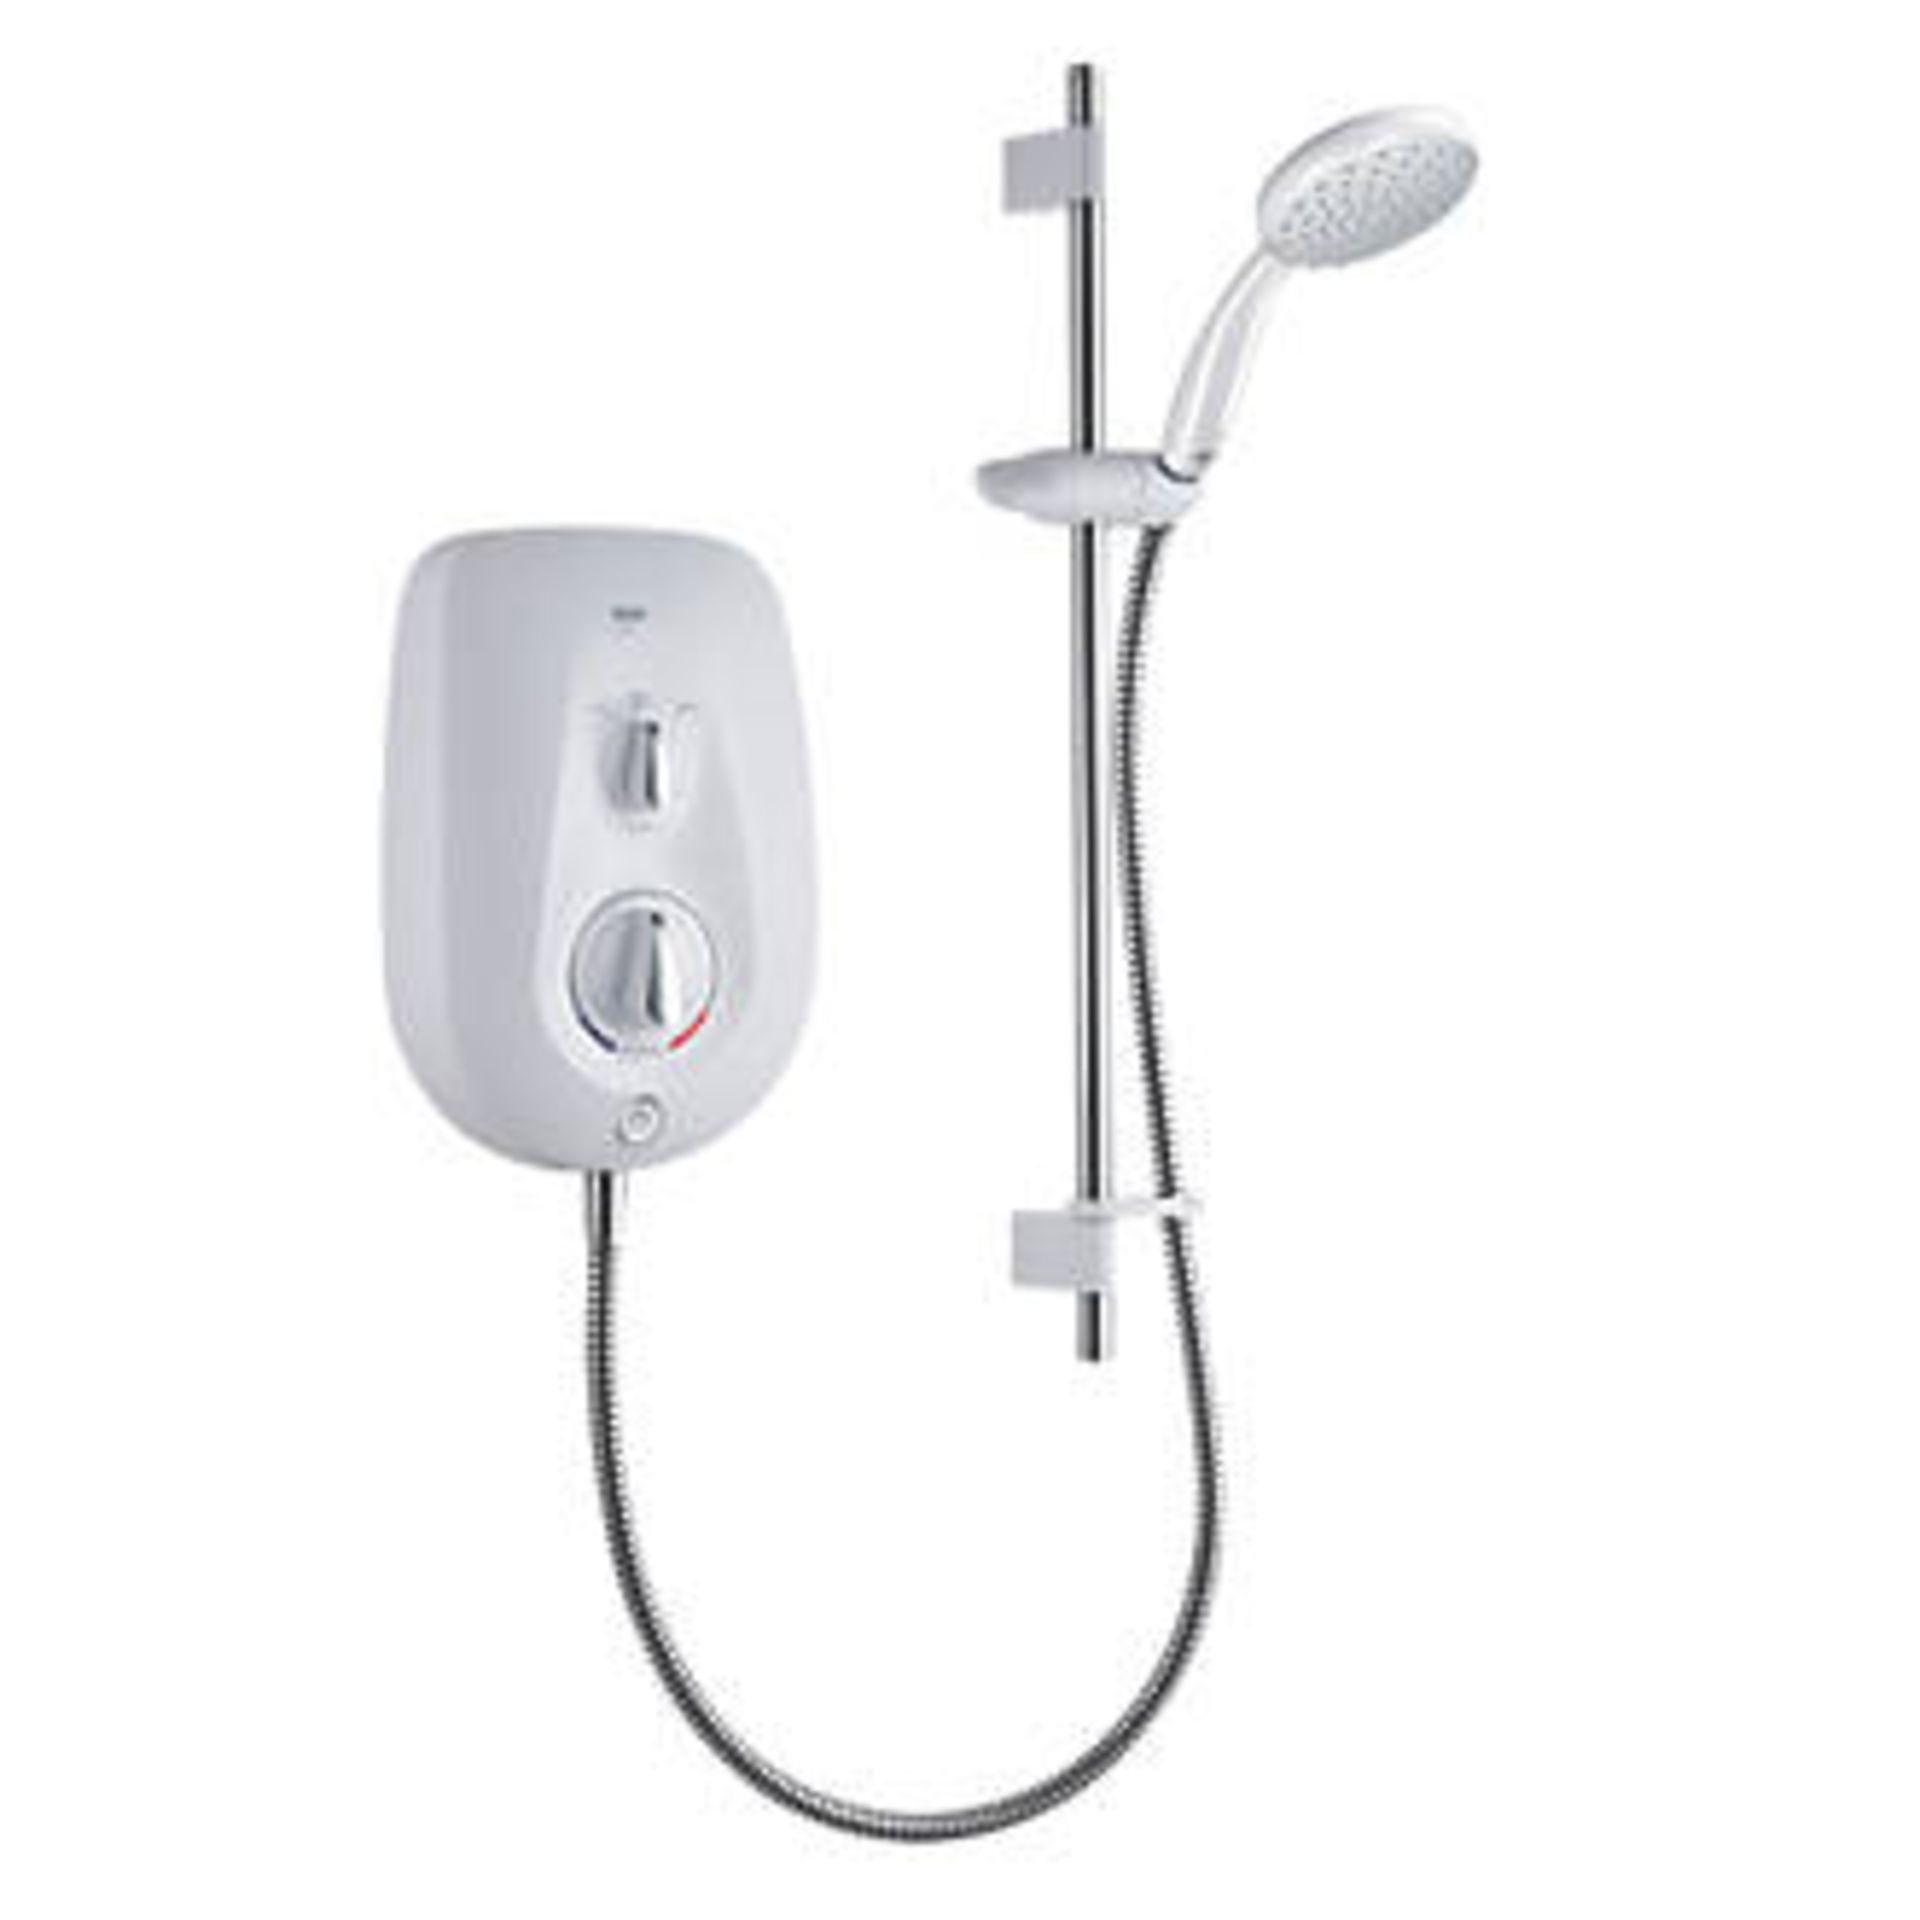 (XL67) Mira Go White 10.8kW Electric Shower. RRP £324.99. Contemporary electric shower with pr...( - Image 2 of 4